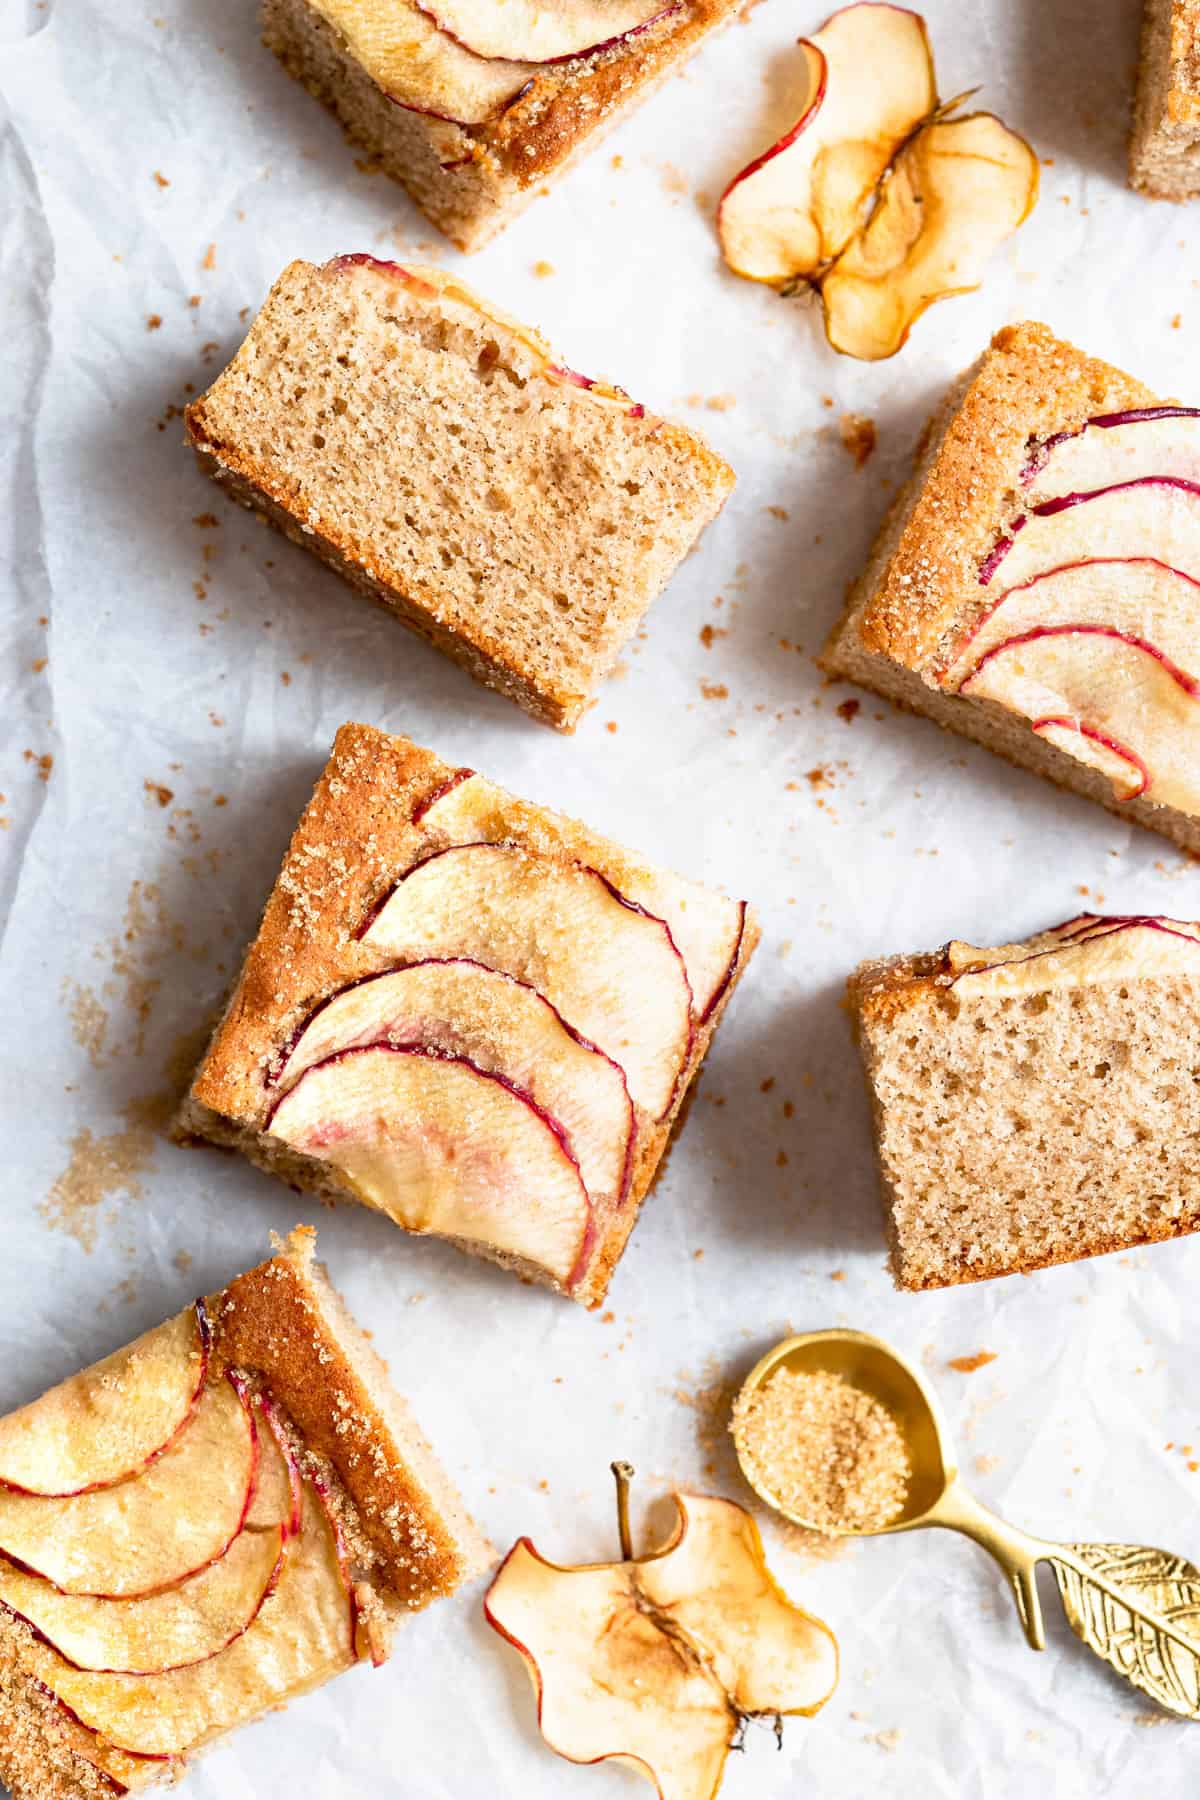 Apple traybake on a white paper with apples